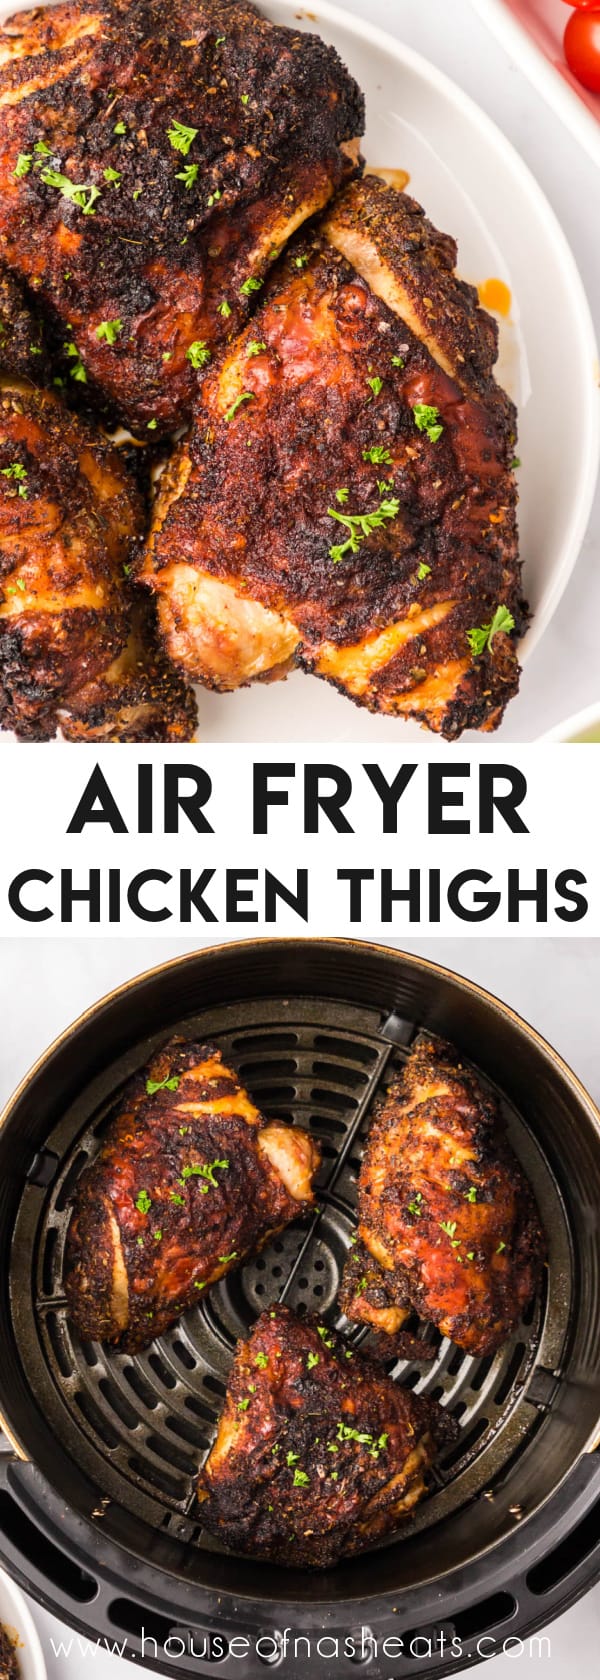 A collage of images of air fryer chicken thighs with text overlay.